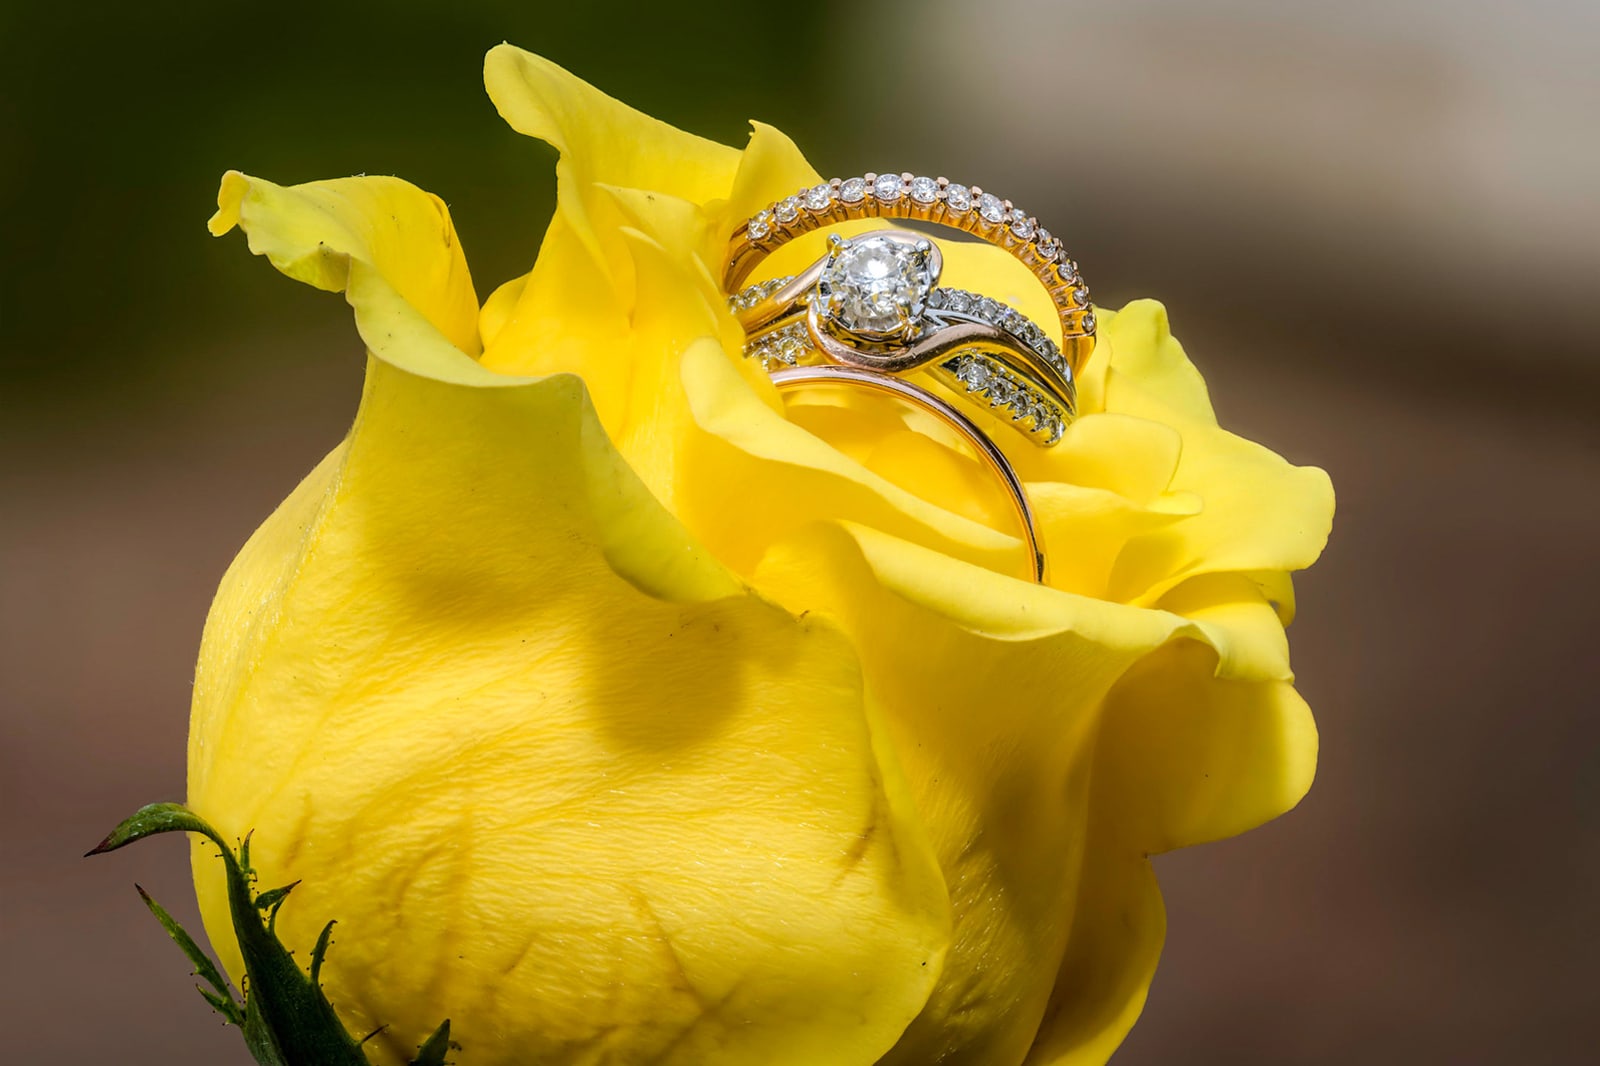 Focus stacking a wedding ring shot in a beautiful yellow rose